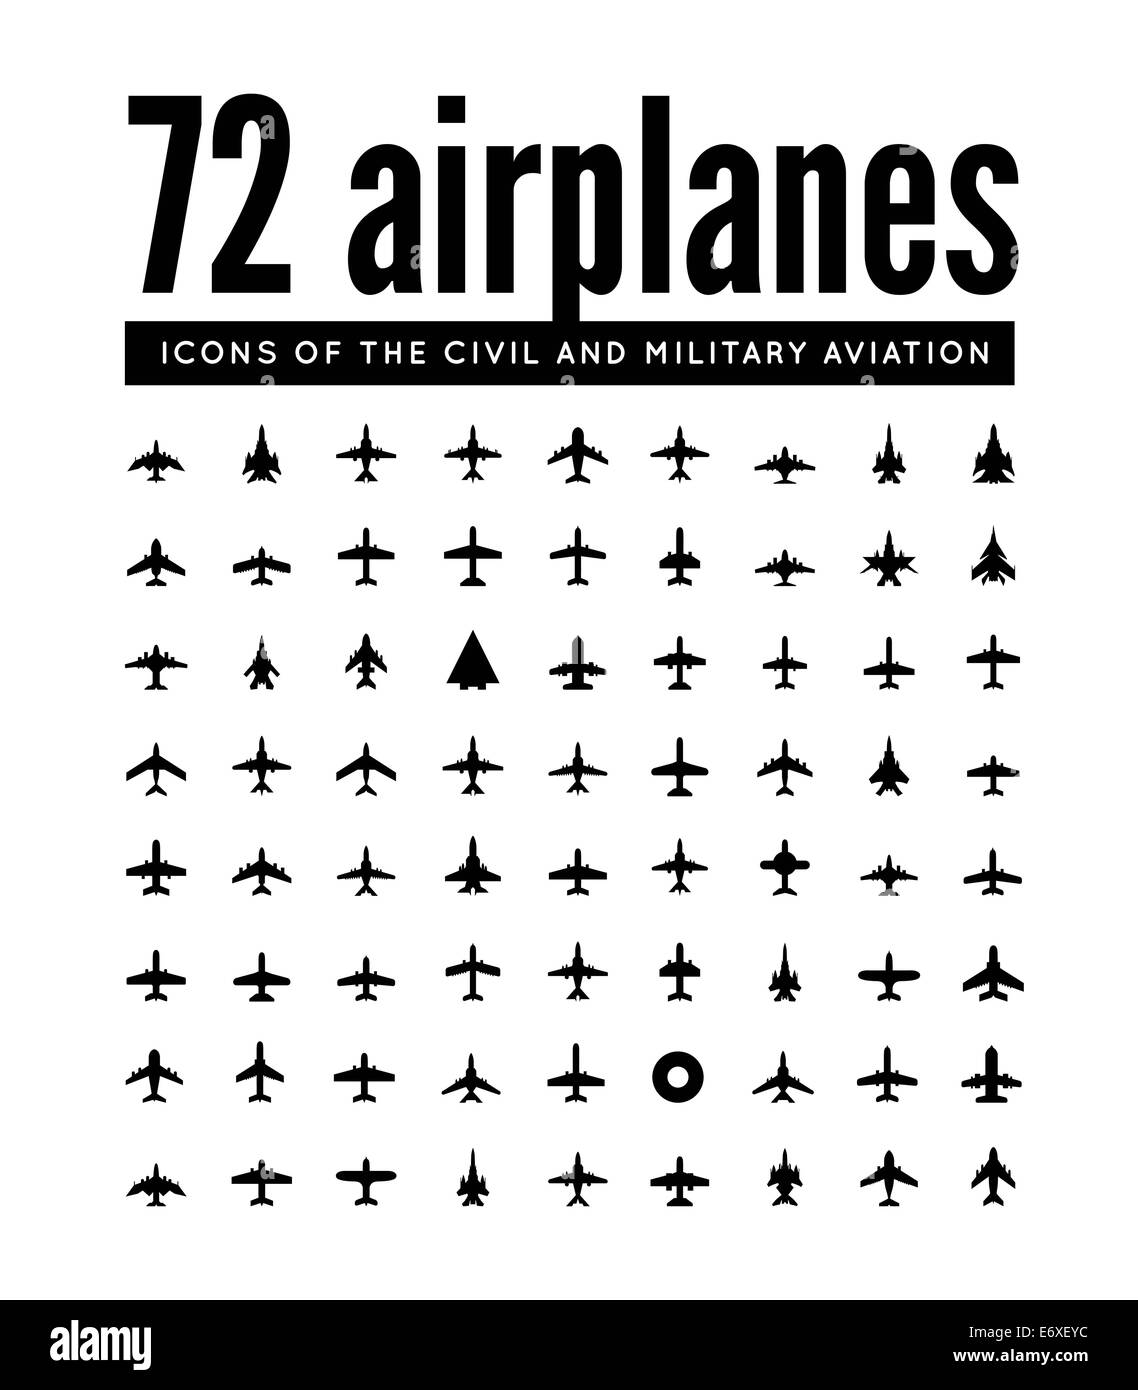 vector icons of airplanes Stock Photo - Alamy